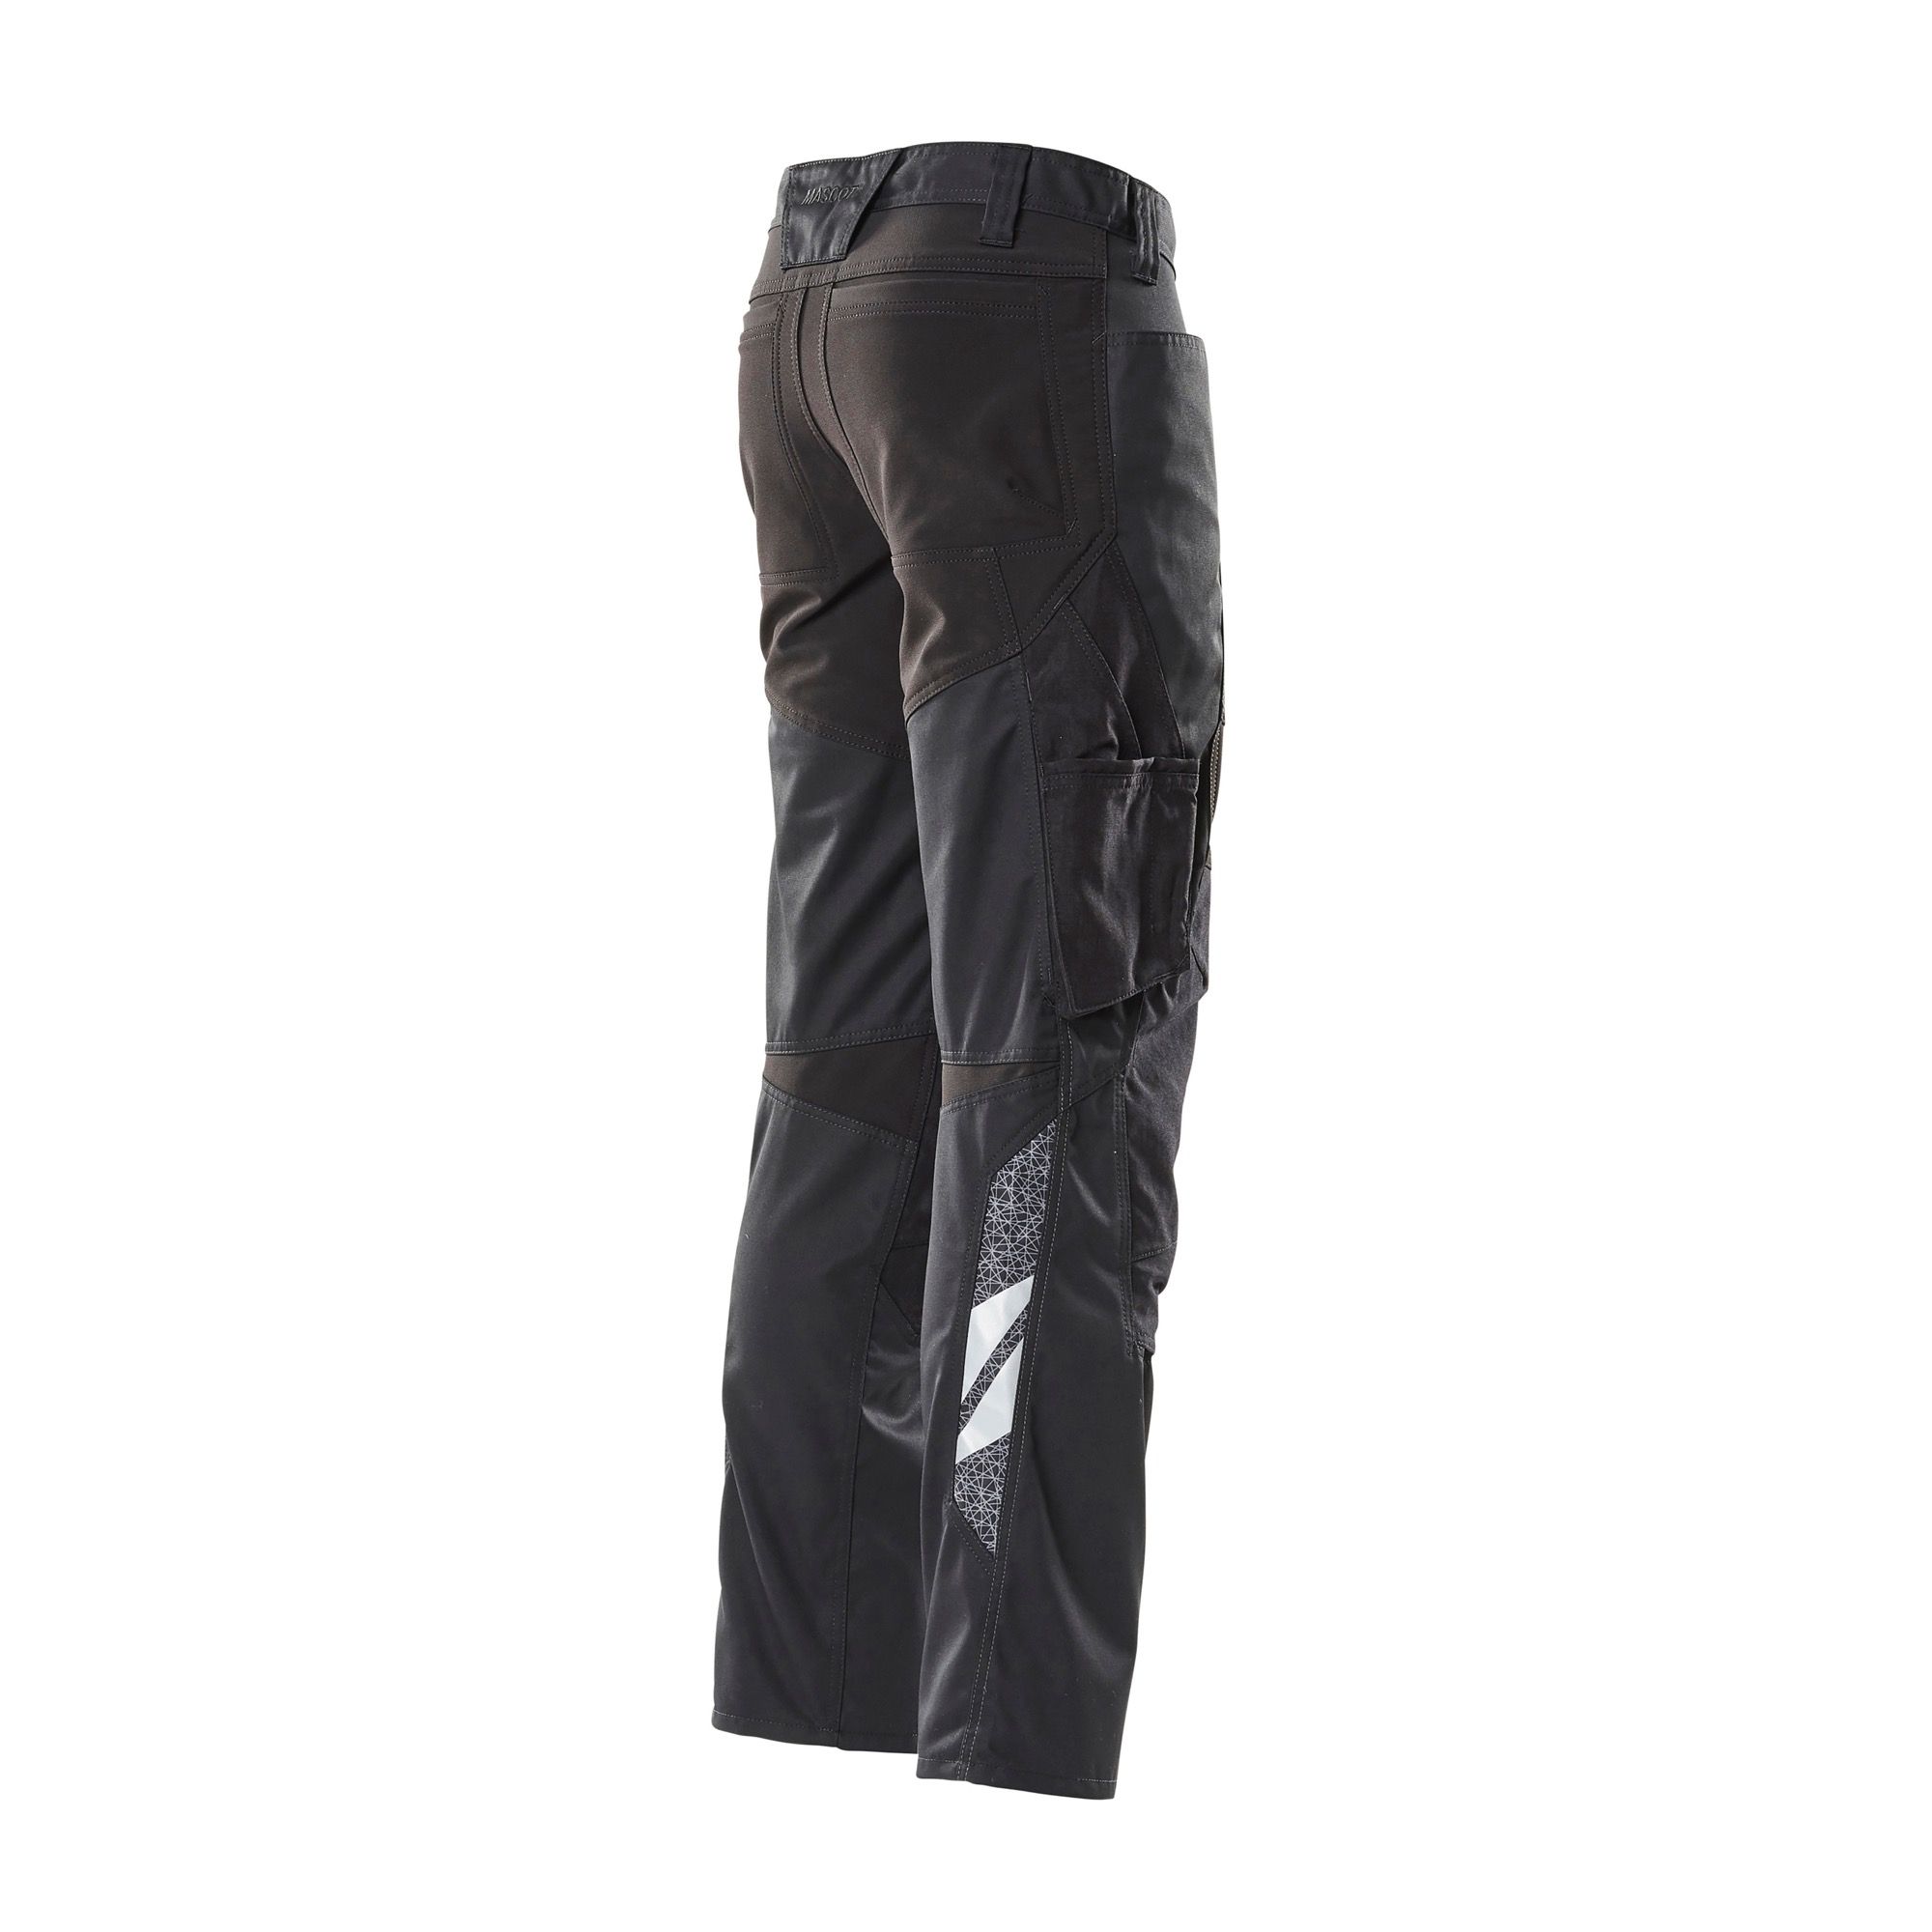 MASCOT®ACCELERATE SAFE ¾ Length Trousers with holster pockets 19049 –  DaltonSafety